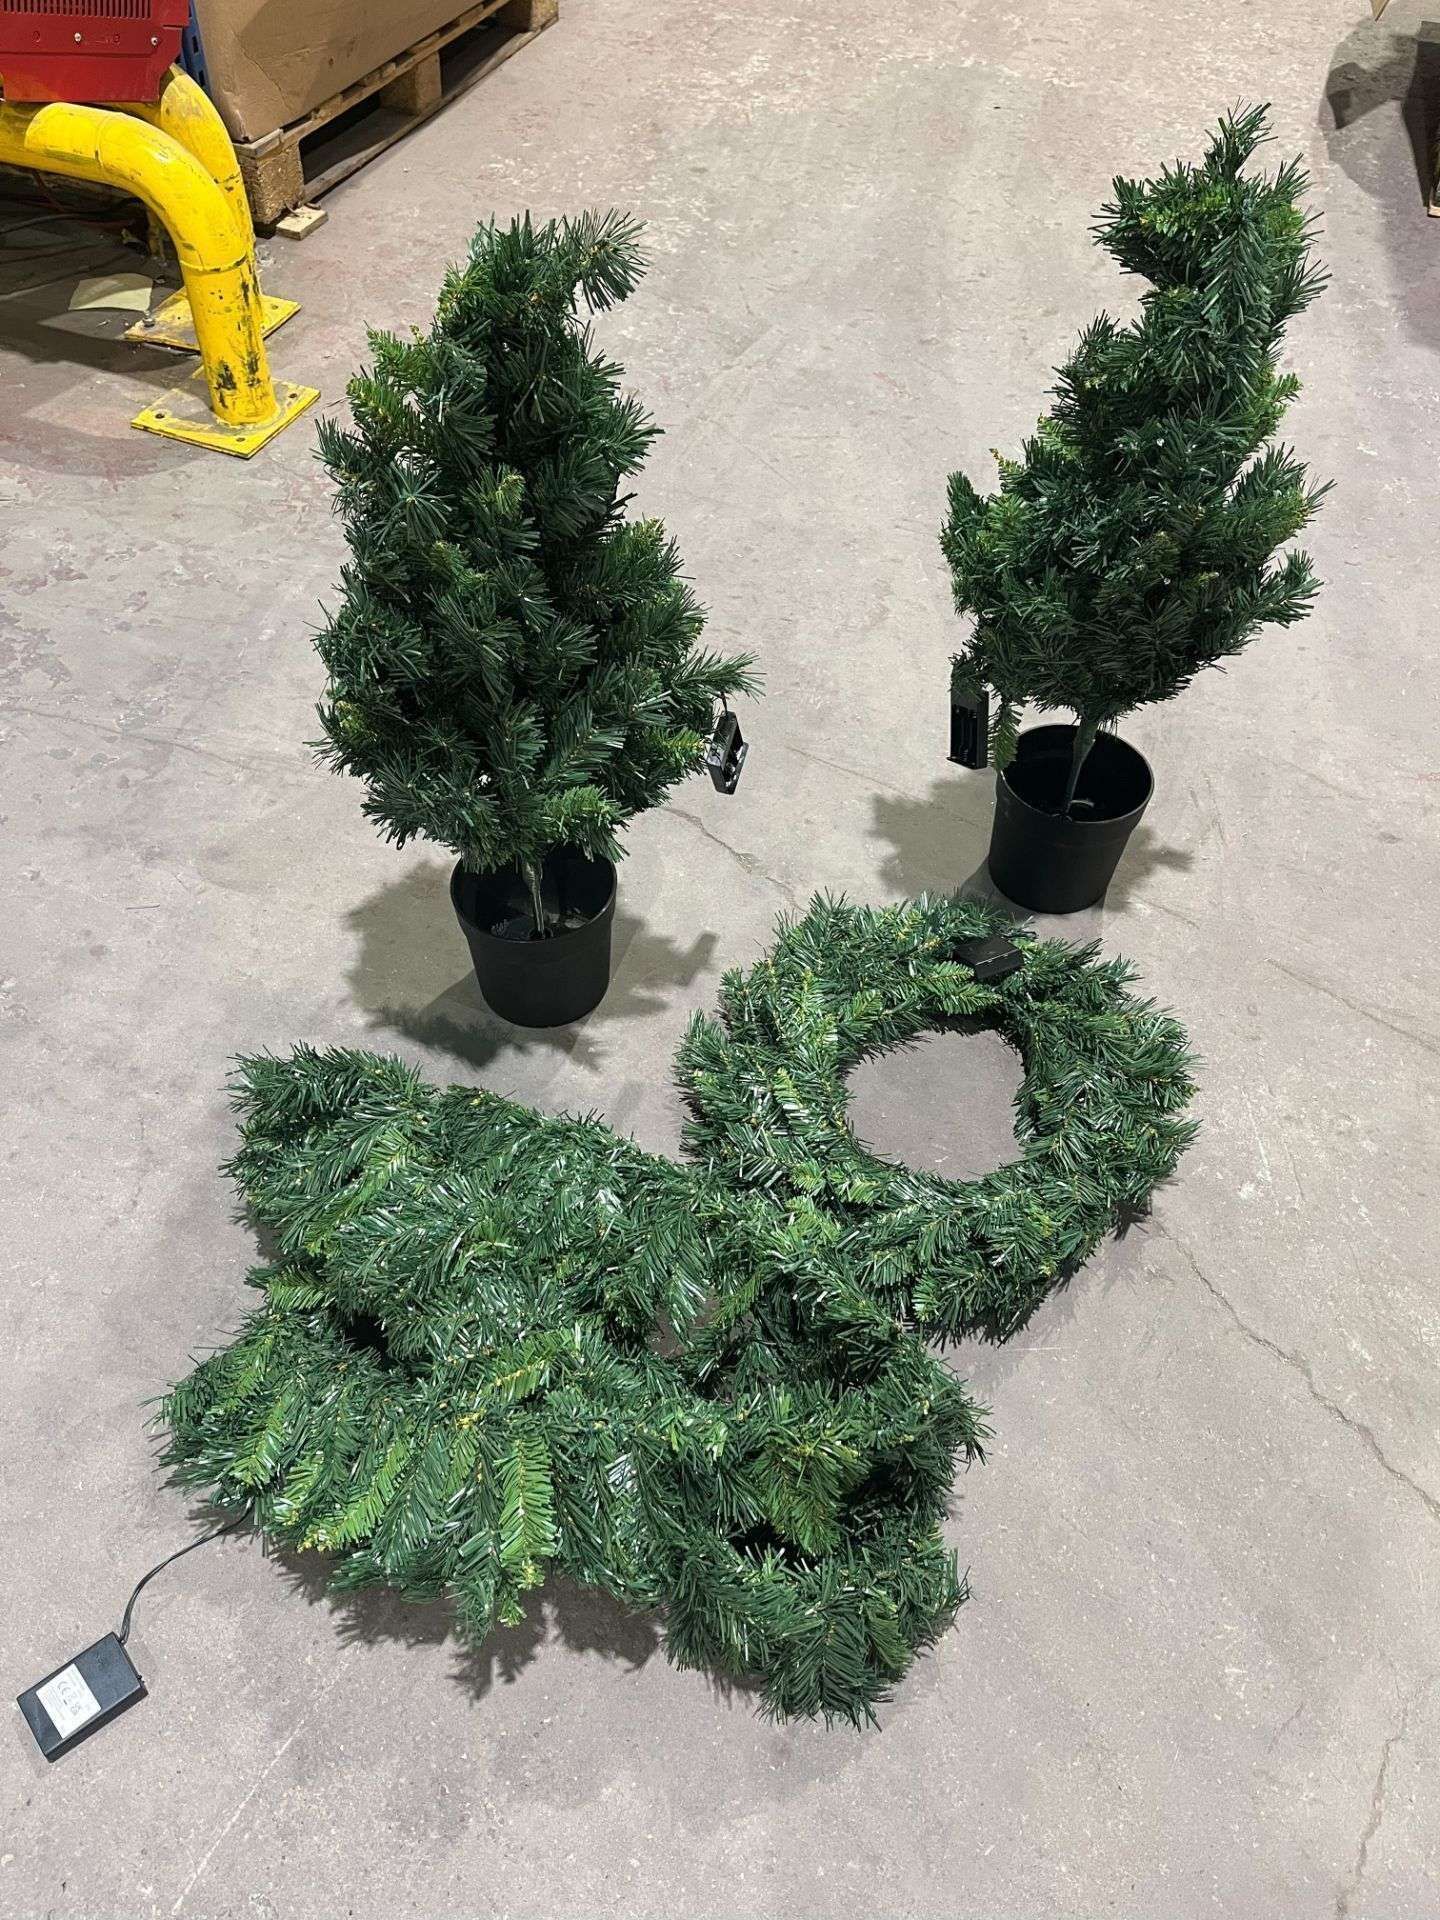 BRAND NEW CHRISTMAS DOOR LED LIGHTS SETS INCLDUNG 2 X POTTED TREES AND 2 BRANCH CONNECTORS RRP £